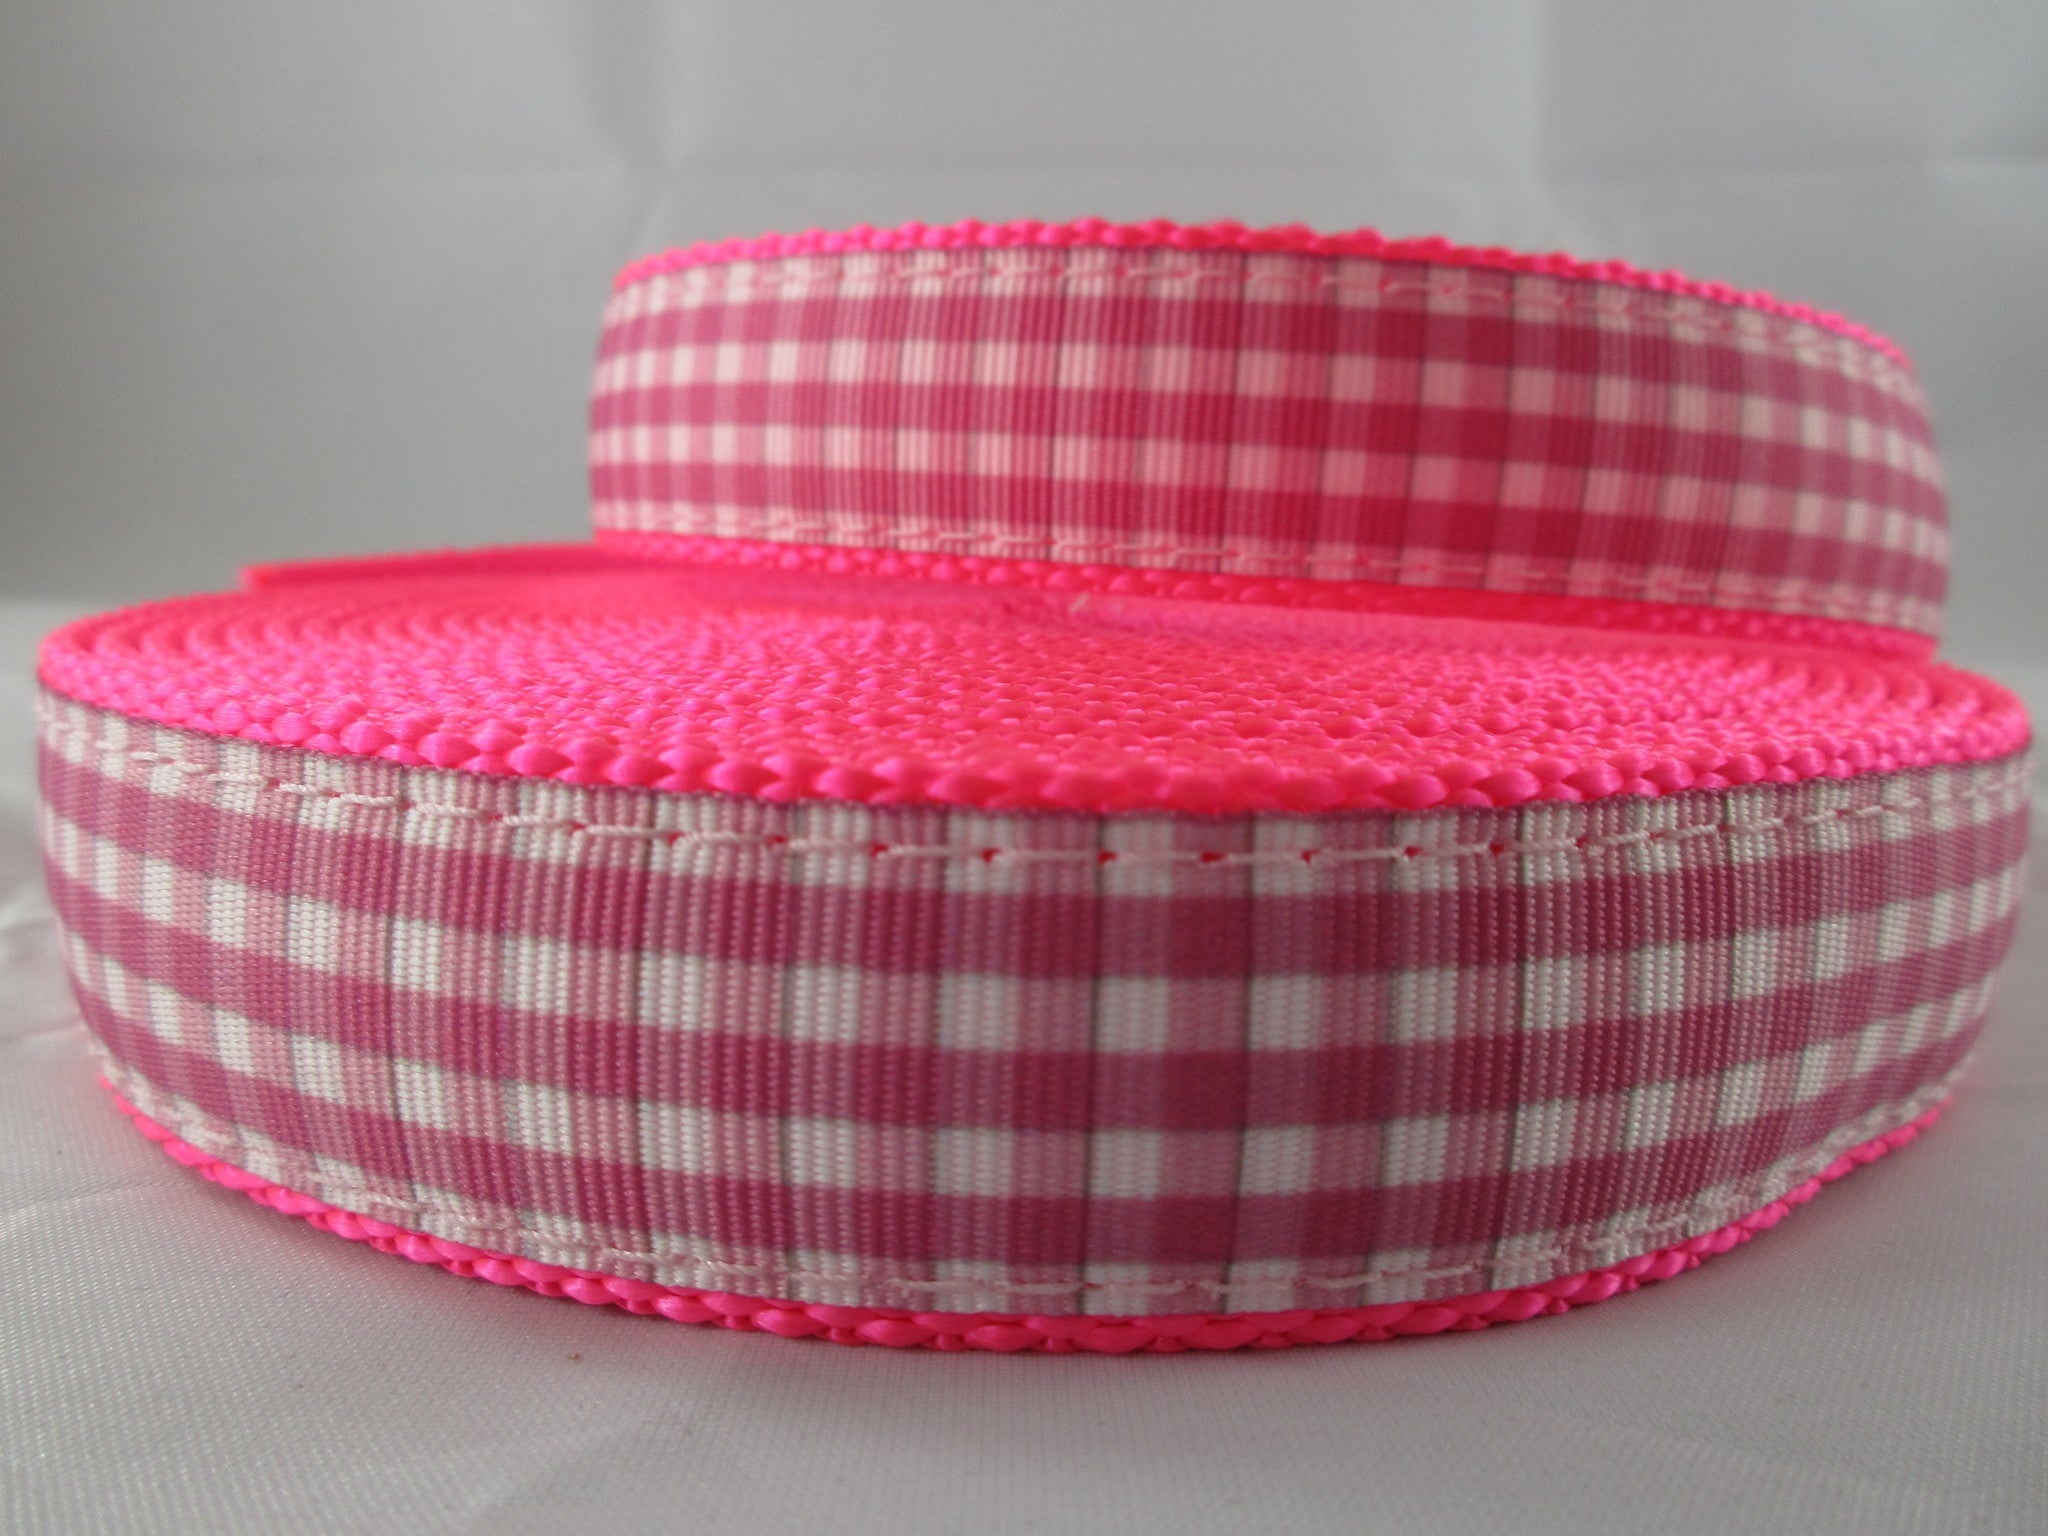 3/4" Pink and White Gingham Leash - Penny and Hoover's Pig Pen